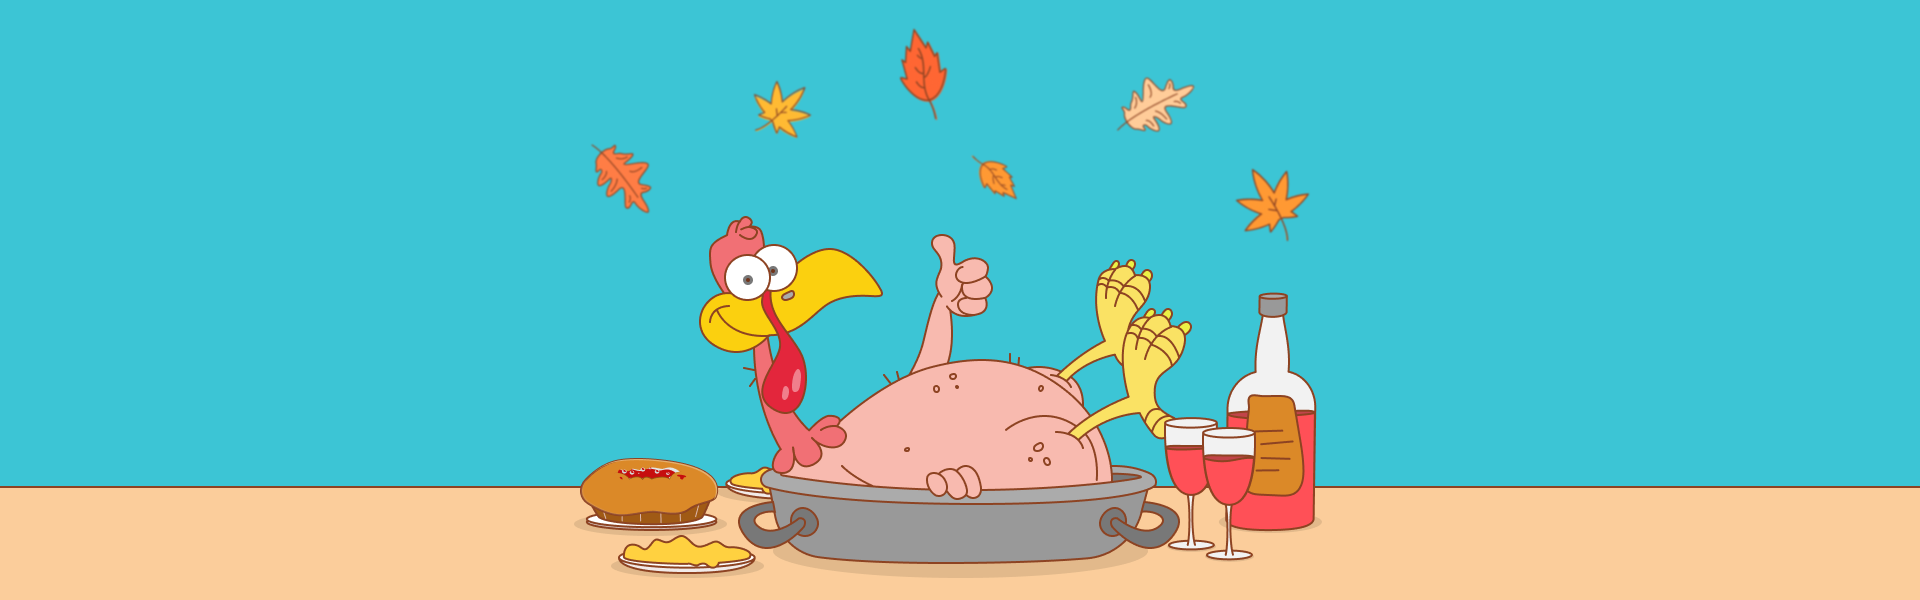 Thanksgiving Email Marketing Ideas Your Subscribers Will Fall for